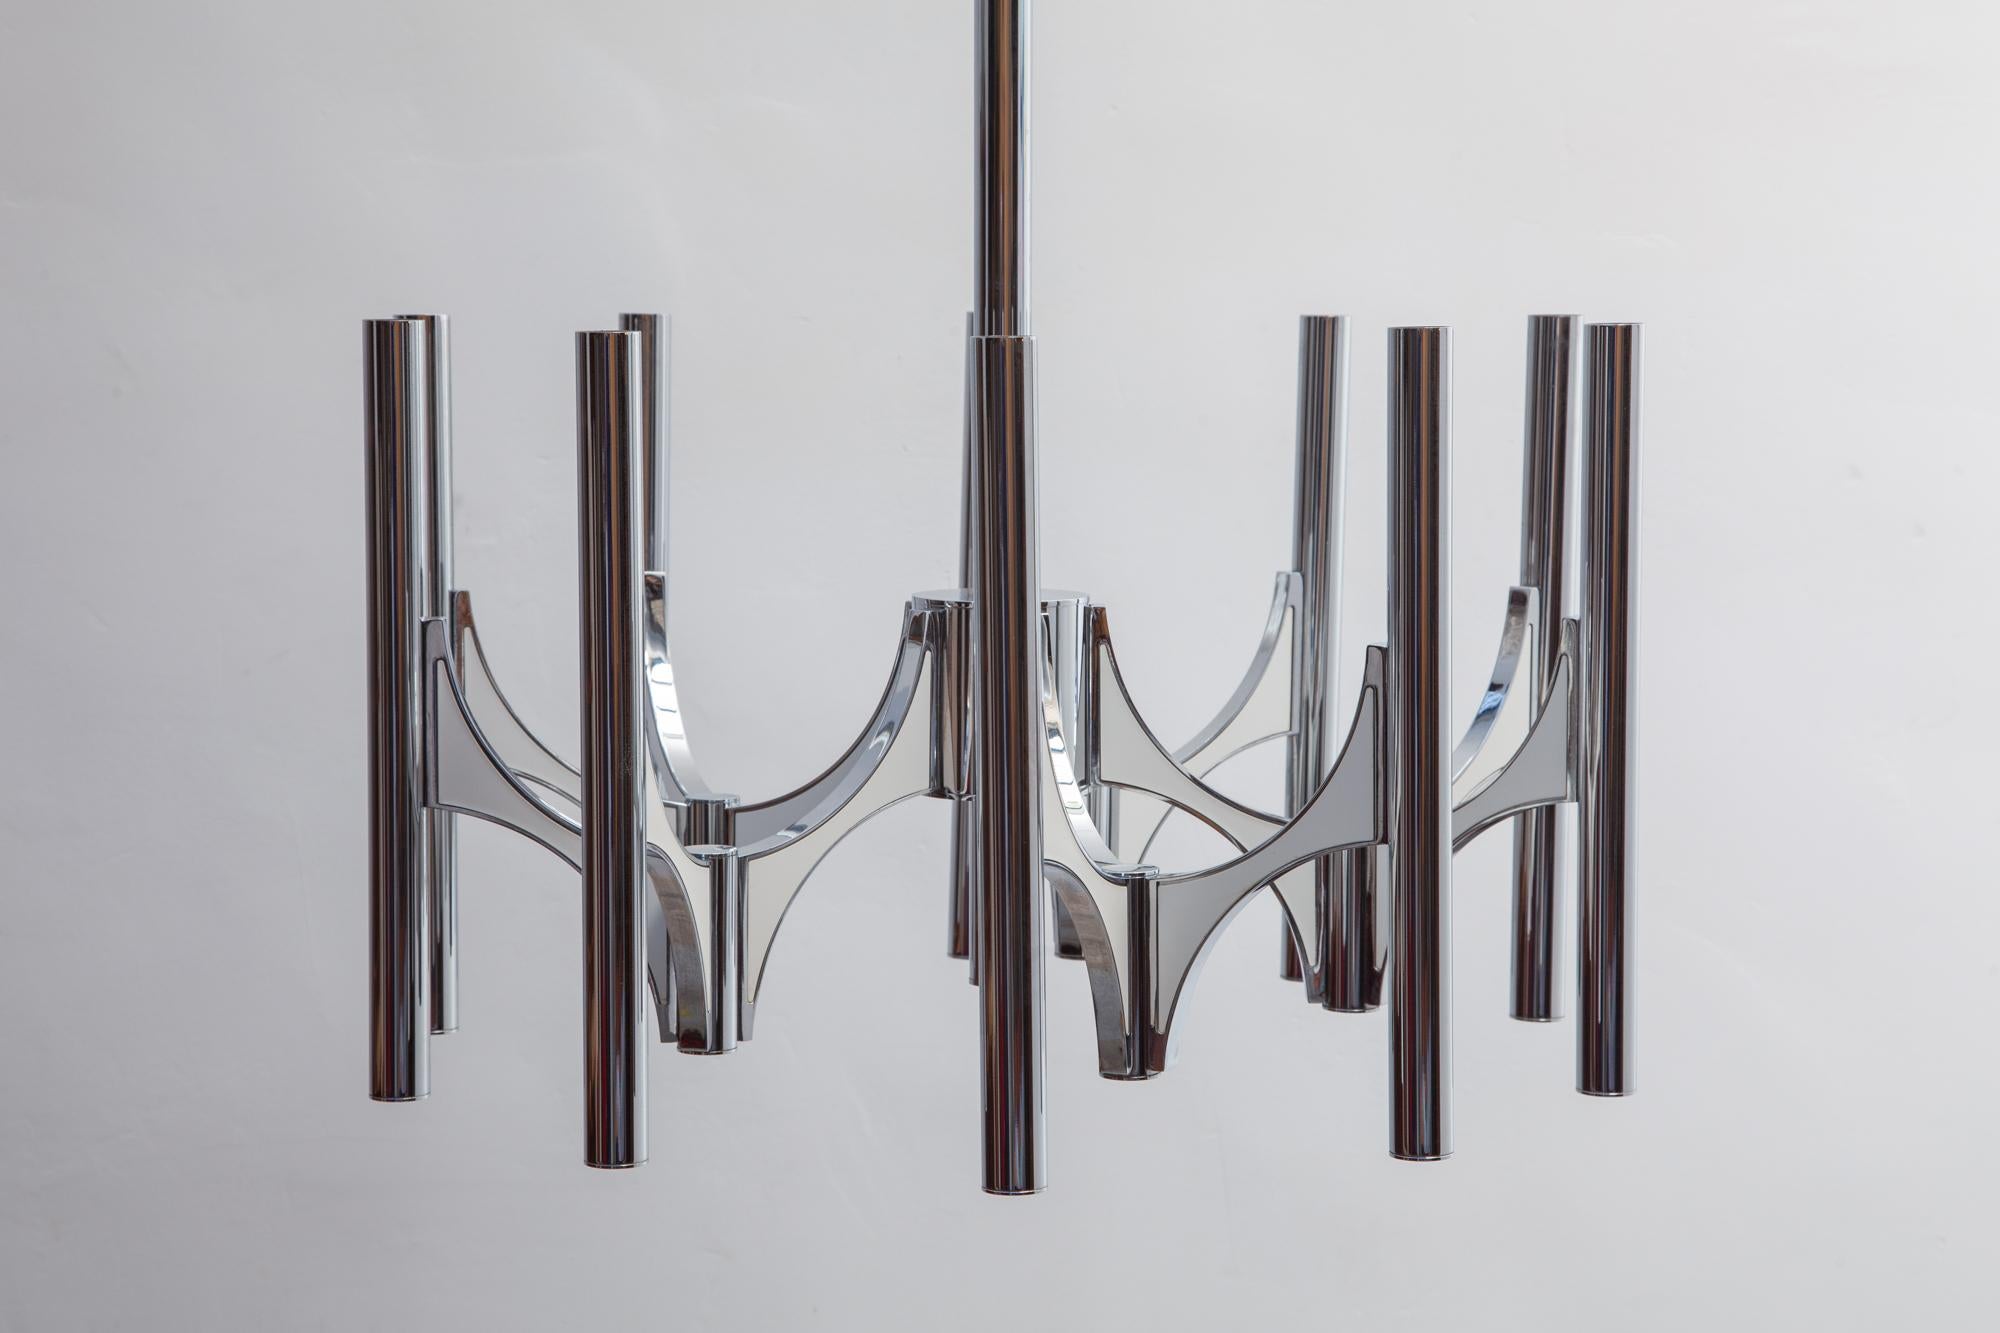 Italian 1960s chandelier by Gaetano Sciolari for Lightolier from the Sciolari's Scultura collection sculptural design in chrome and white lacquer, lit by ten bulbs.
Attractive sculptural combination of polished chrome vertical tubes connected by